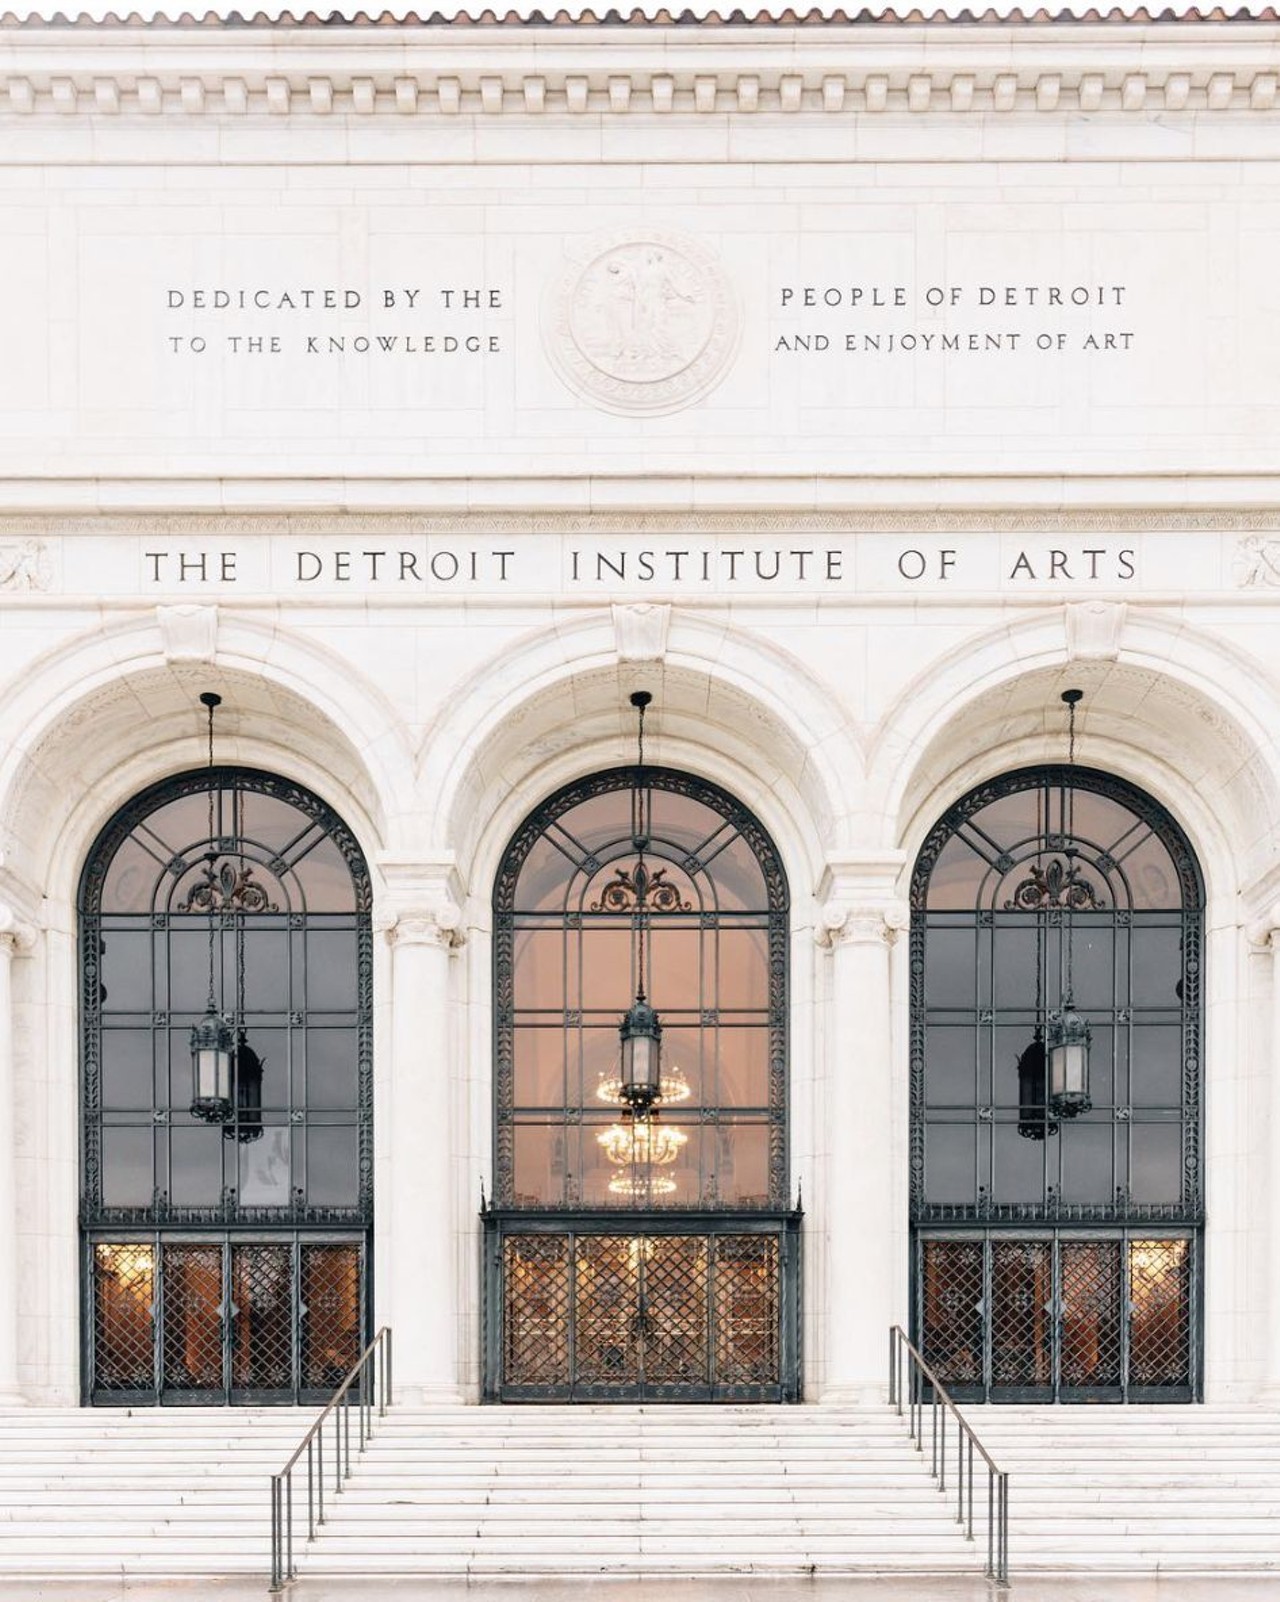 Detroit Institute of Arts
5200 Woodward Ave, Detroit, MI 48202
The Detroit Institute of Arts is one of the world&#146;s largest art collections with over 100 galleries and is well-known for it&#146;s sprawling mural by famous Mexican artist, Diego Rivera.
Photo courtesy of @erol_is